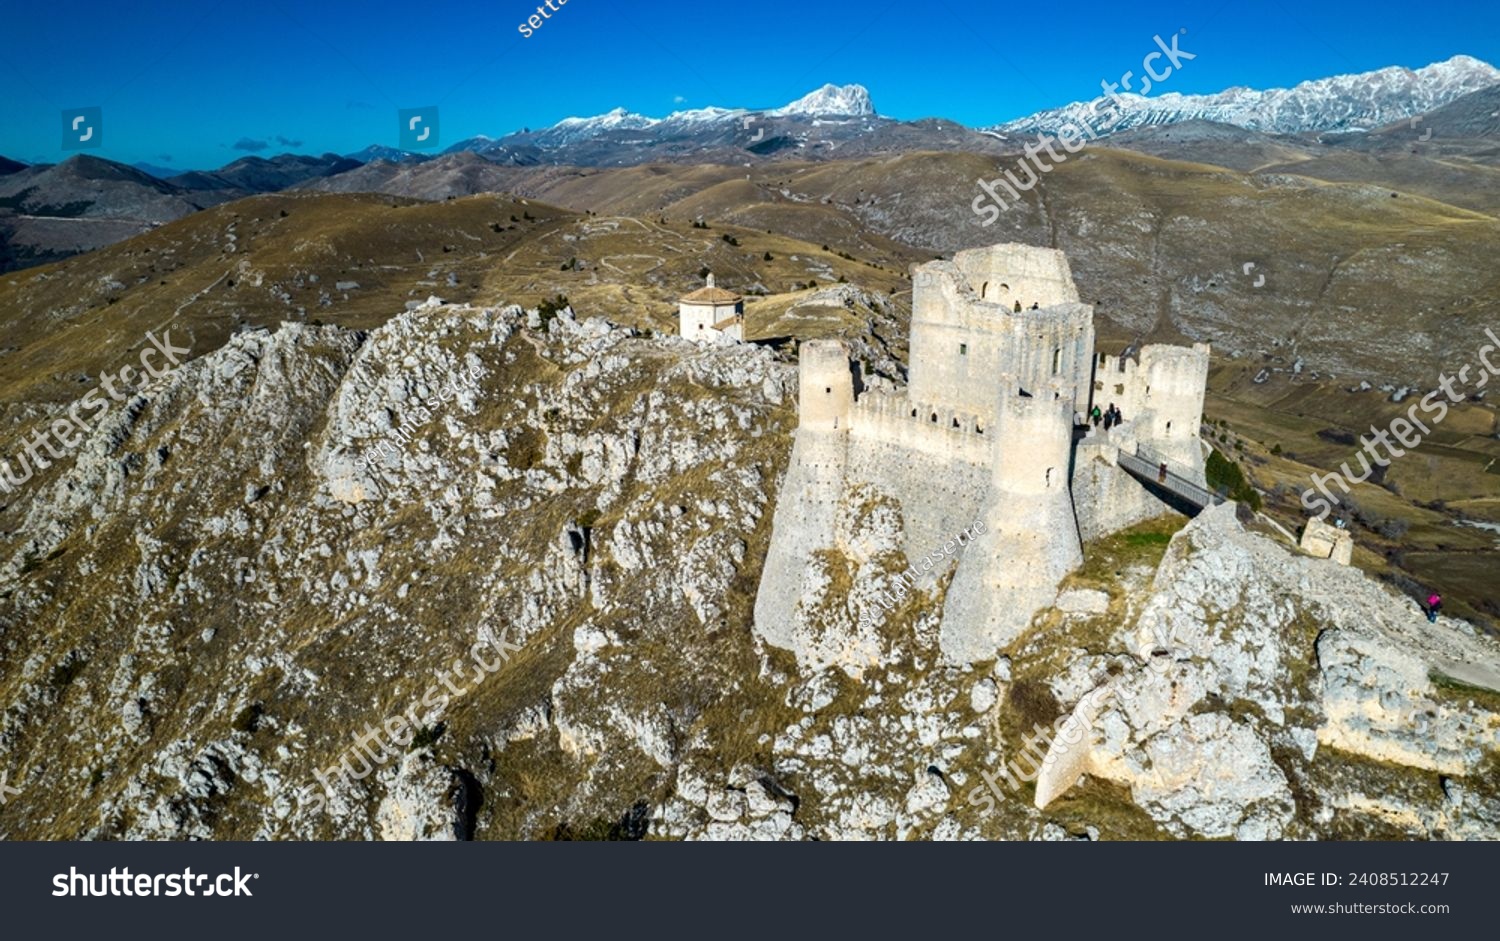 Rocca Calascio 2023. Aerial view of the castle of Rocca Calascio, built in 1140, it is the highest fortification in the Apennines. January 2024 Abruzzo, Italy #2408512247